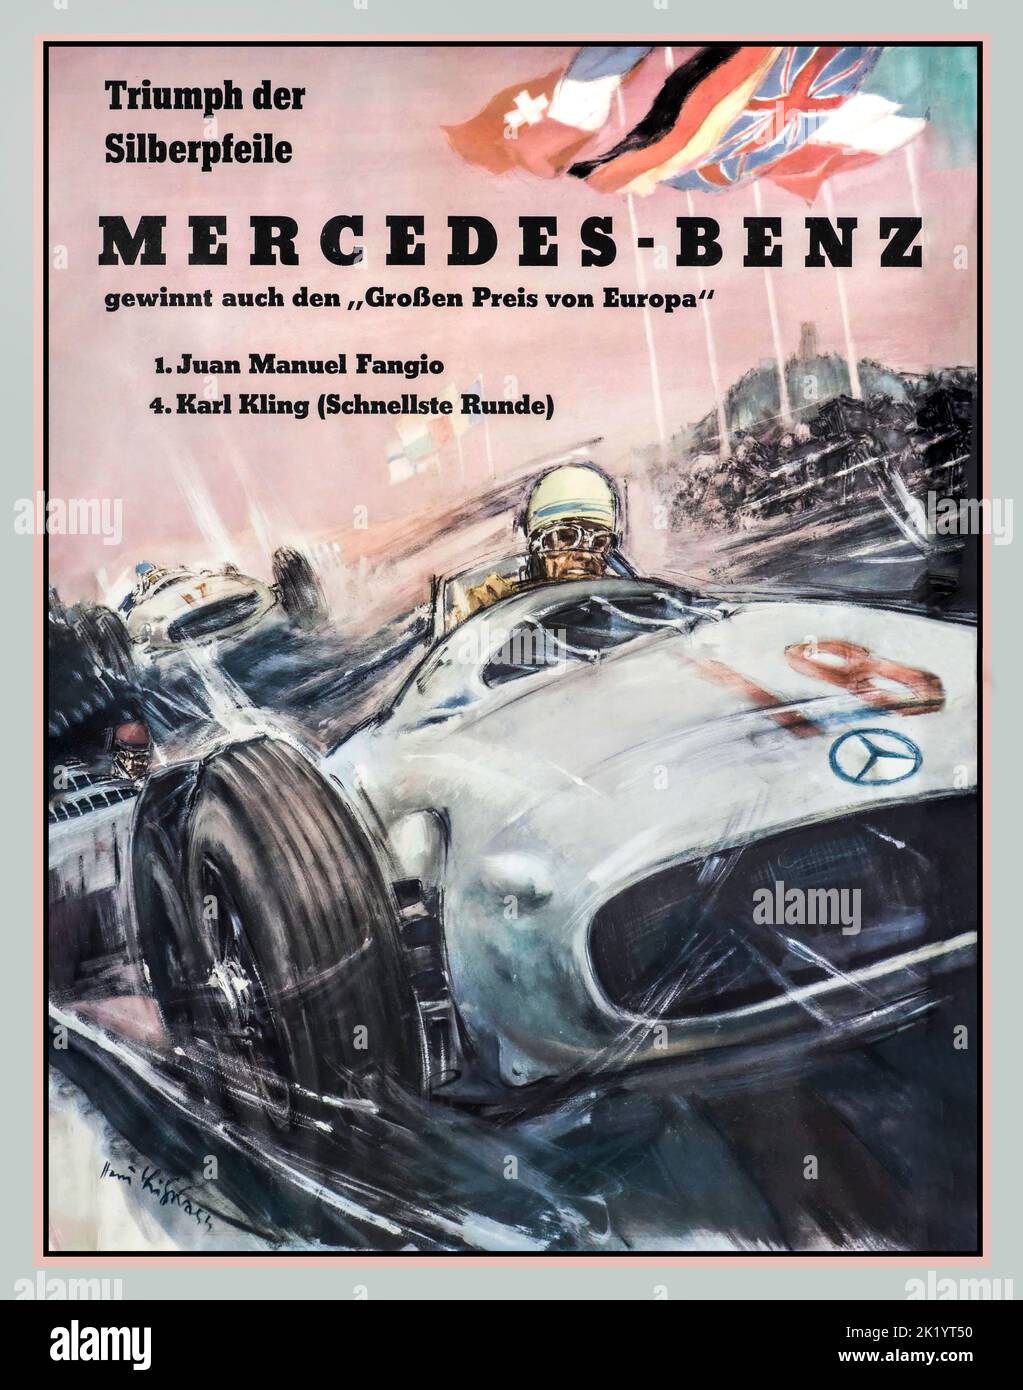 1950s Mercedes Grand Prix Poster 'Triumph of The Silver Arrows' Grand Prix of Europe First  No 1 Juan Manuel Fangio in a W196 Mercedes motor racing car Brochure advertising Mercedes Motorcars Stock Photo